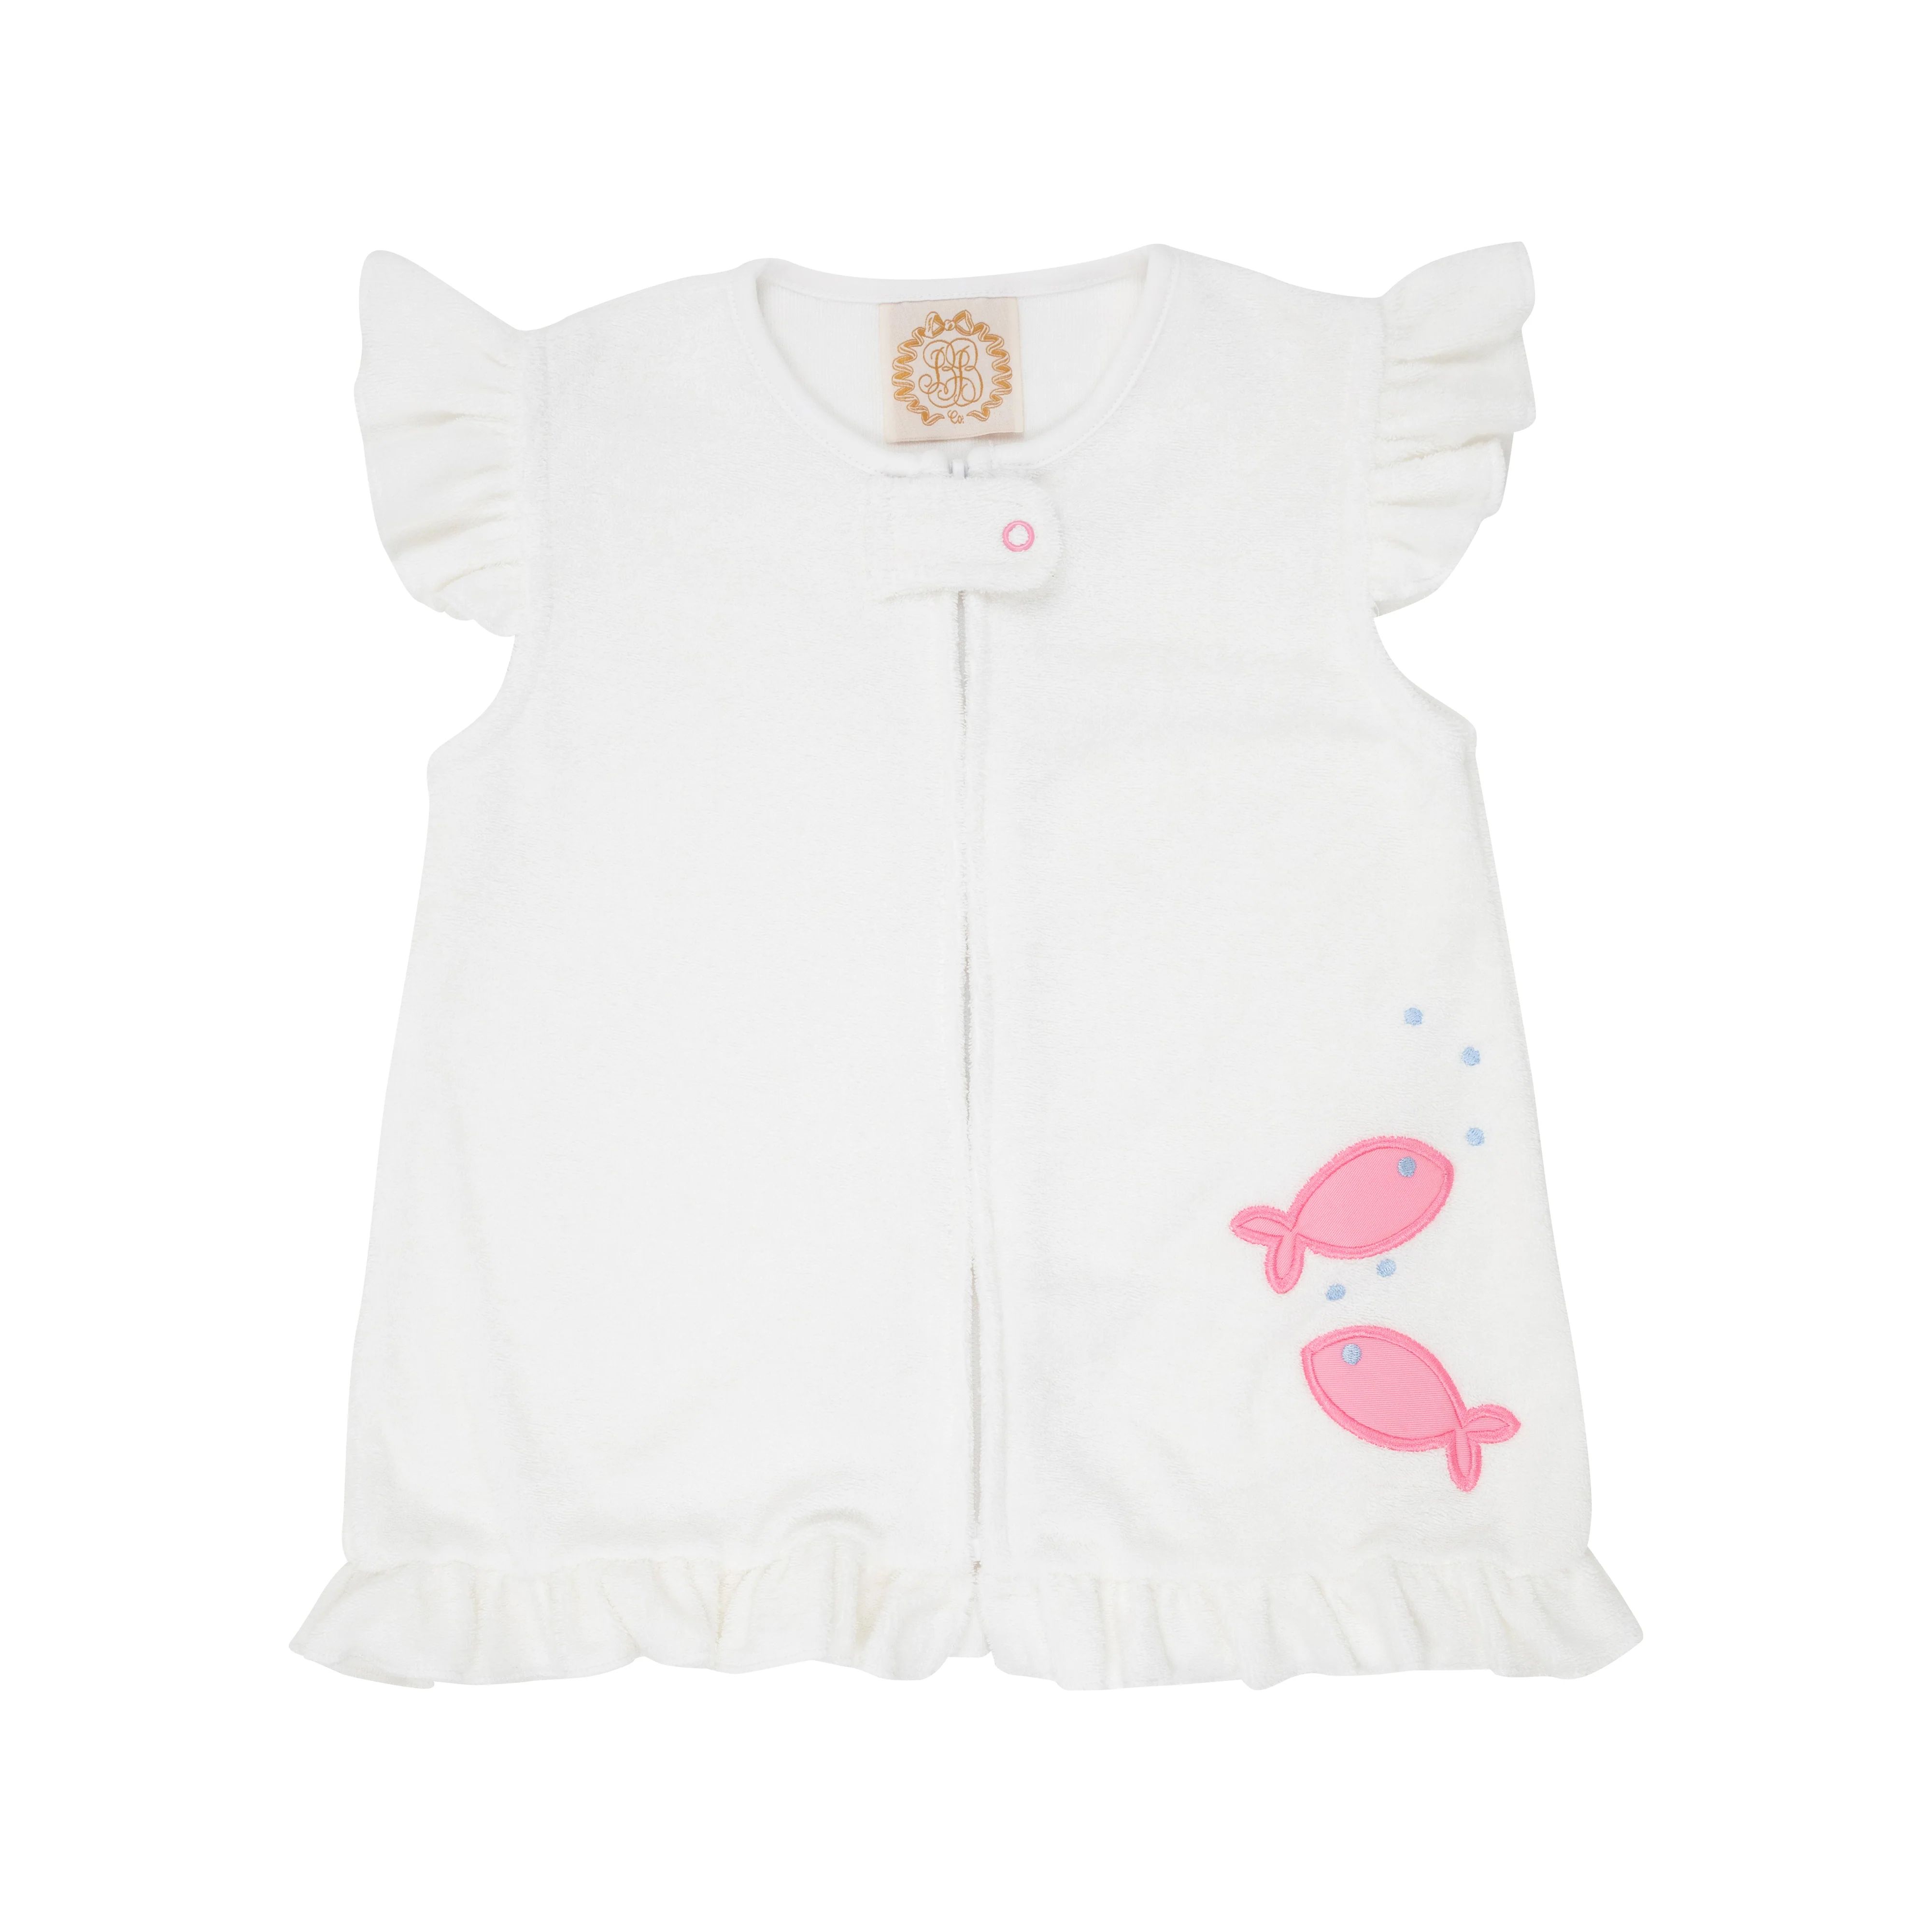 Camille Cover Up - Worth Avenue White with Hamptons Hot Pink Fish Applique | The Beaufort Bonnet Company